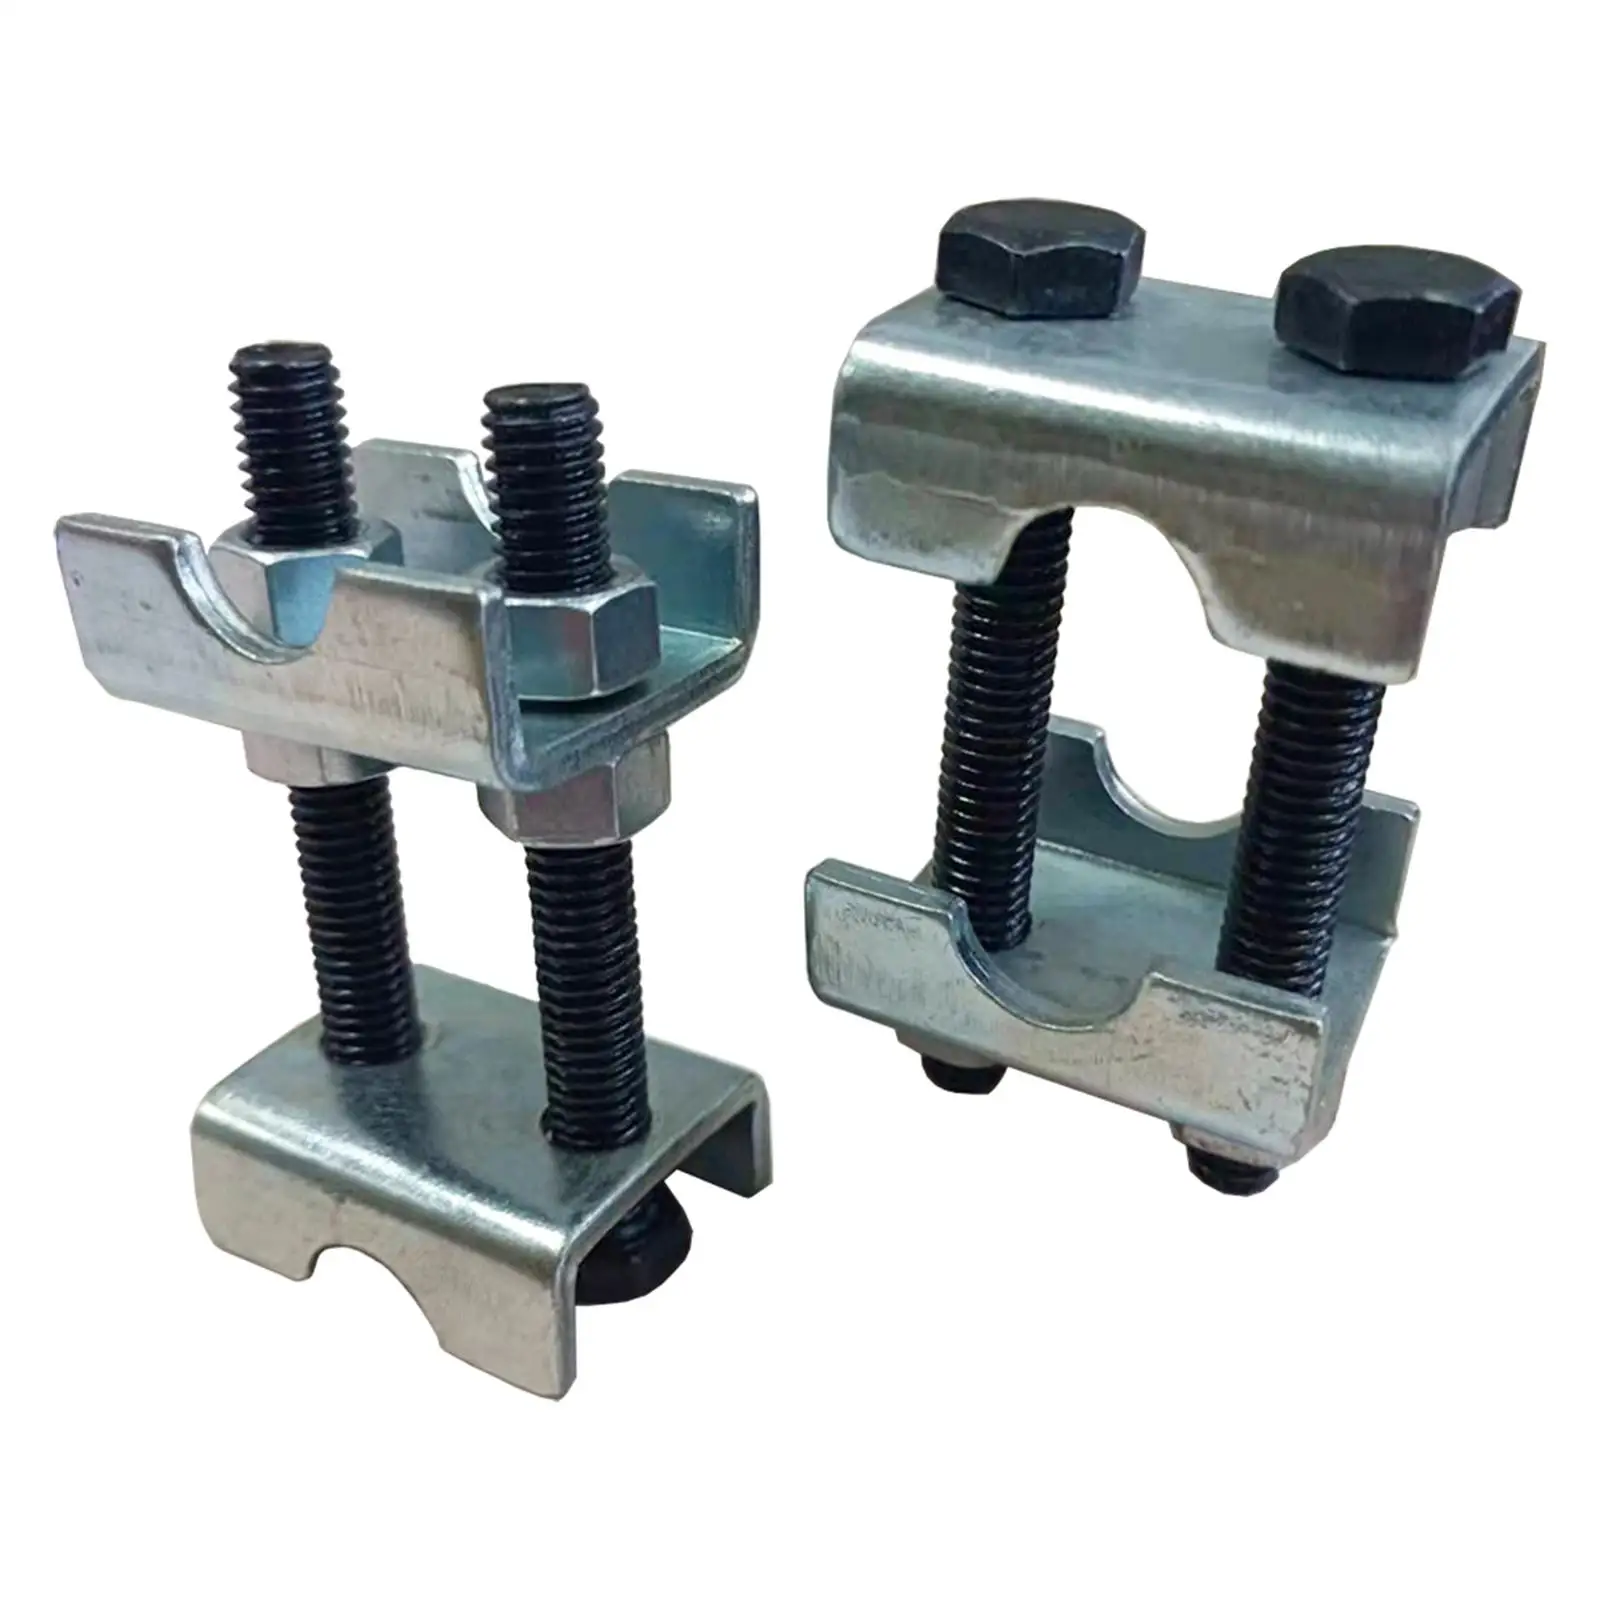 Mini  Compressor Professional Spreads or Compresses Direct Replaces Car Automotive Spare Parts  Adjustable Spring Spacer